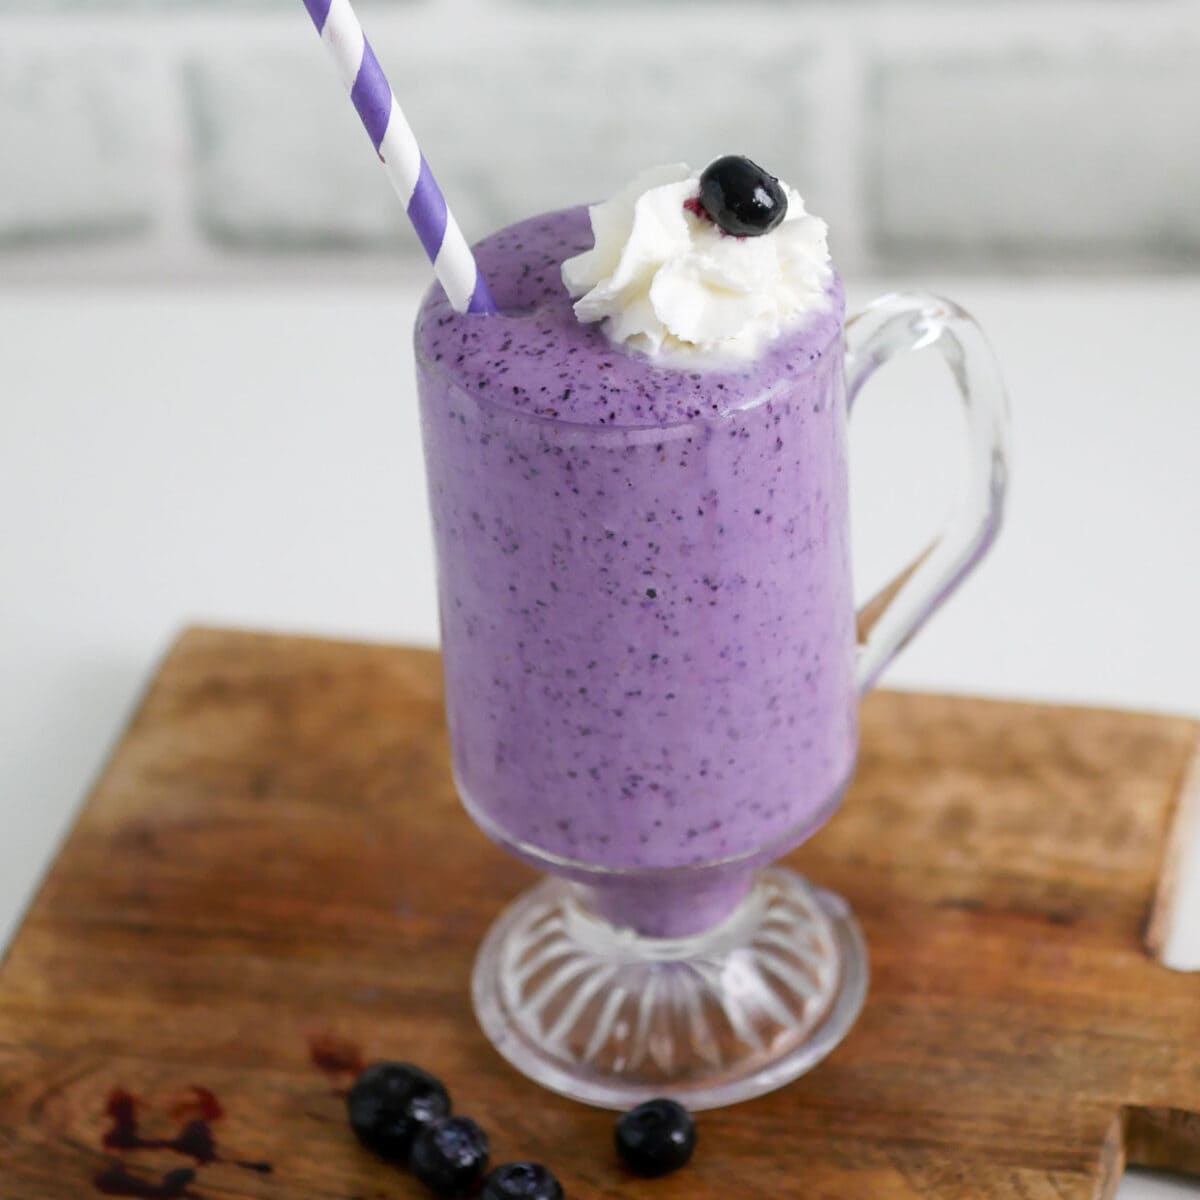 Blueberry milkshake in a glass topped with whipped cream and a purple straw.